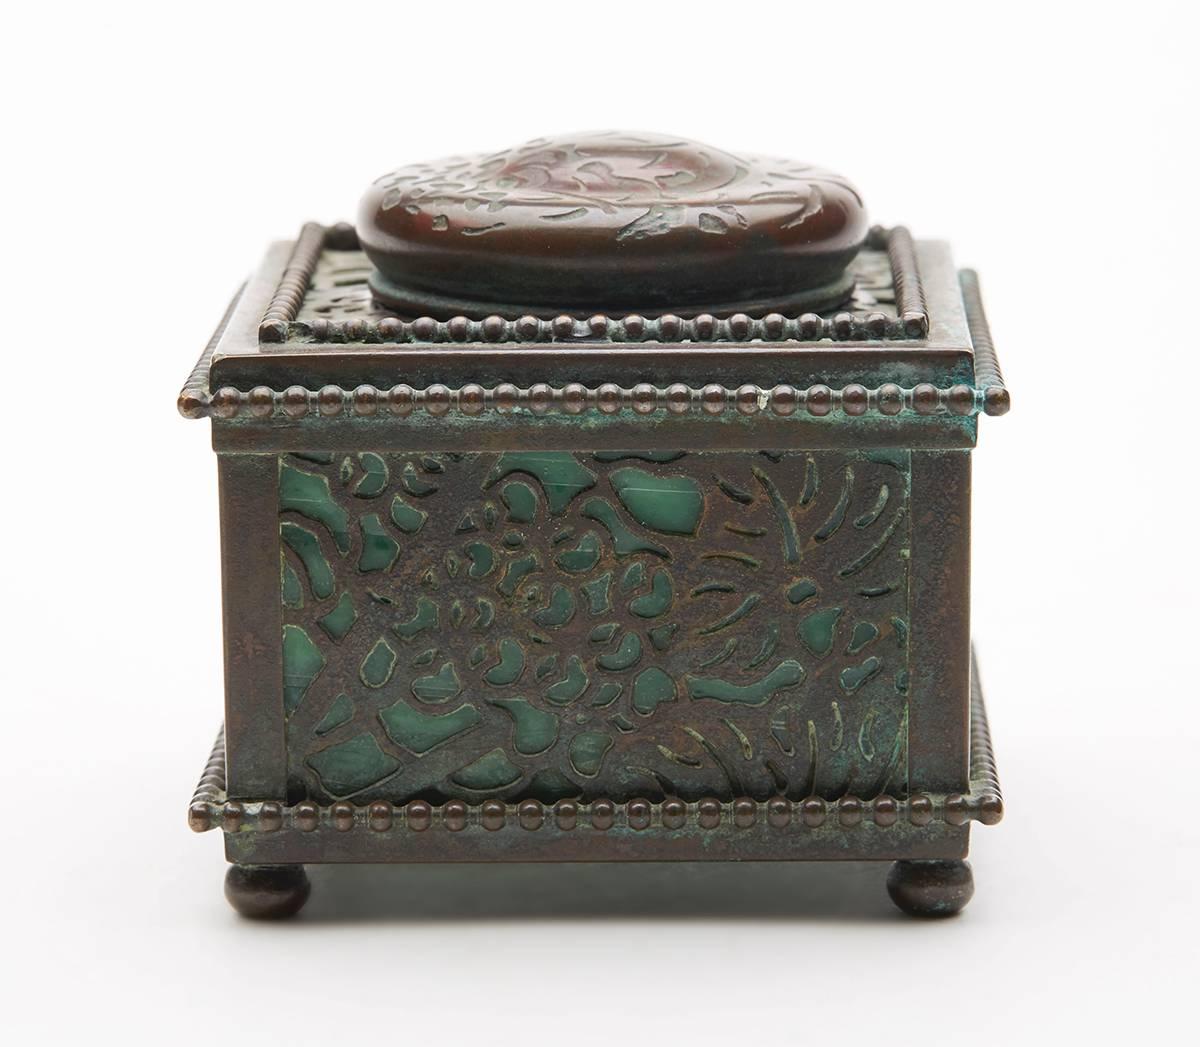 A fine antique Tiffany Studios bronze mounted marbled green glass lidded inkwell in the grape pattern design. The square shaped inkwell stands mounted on four ball feet with open work panels with grape vine designs over green marbled glass panes.